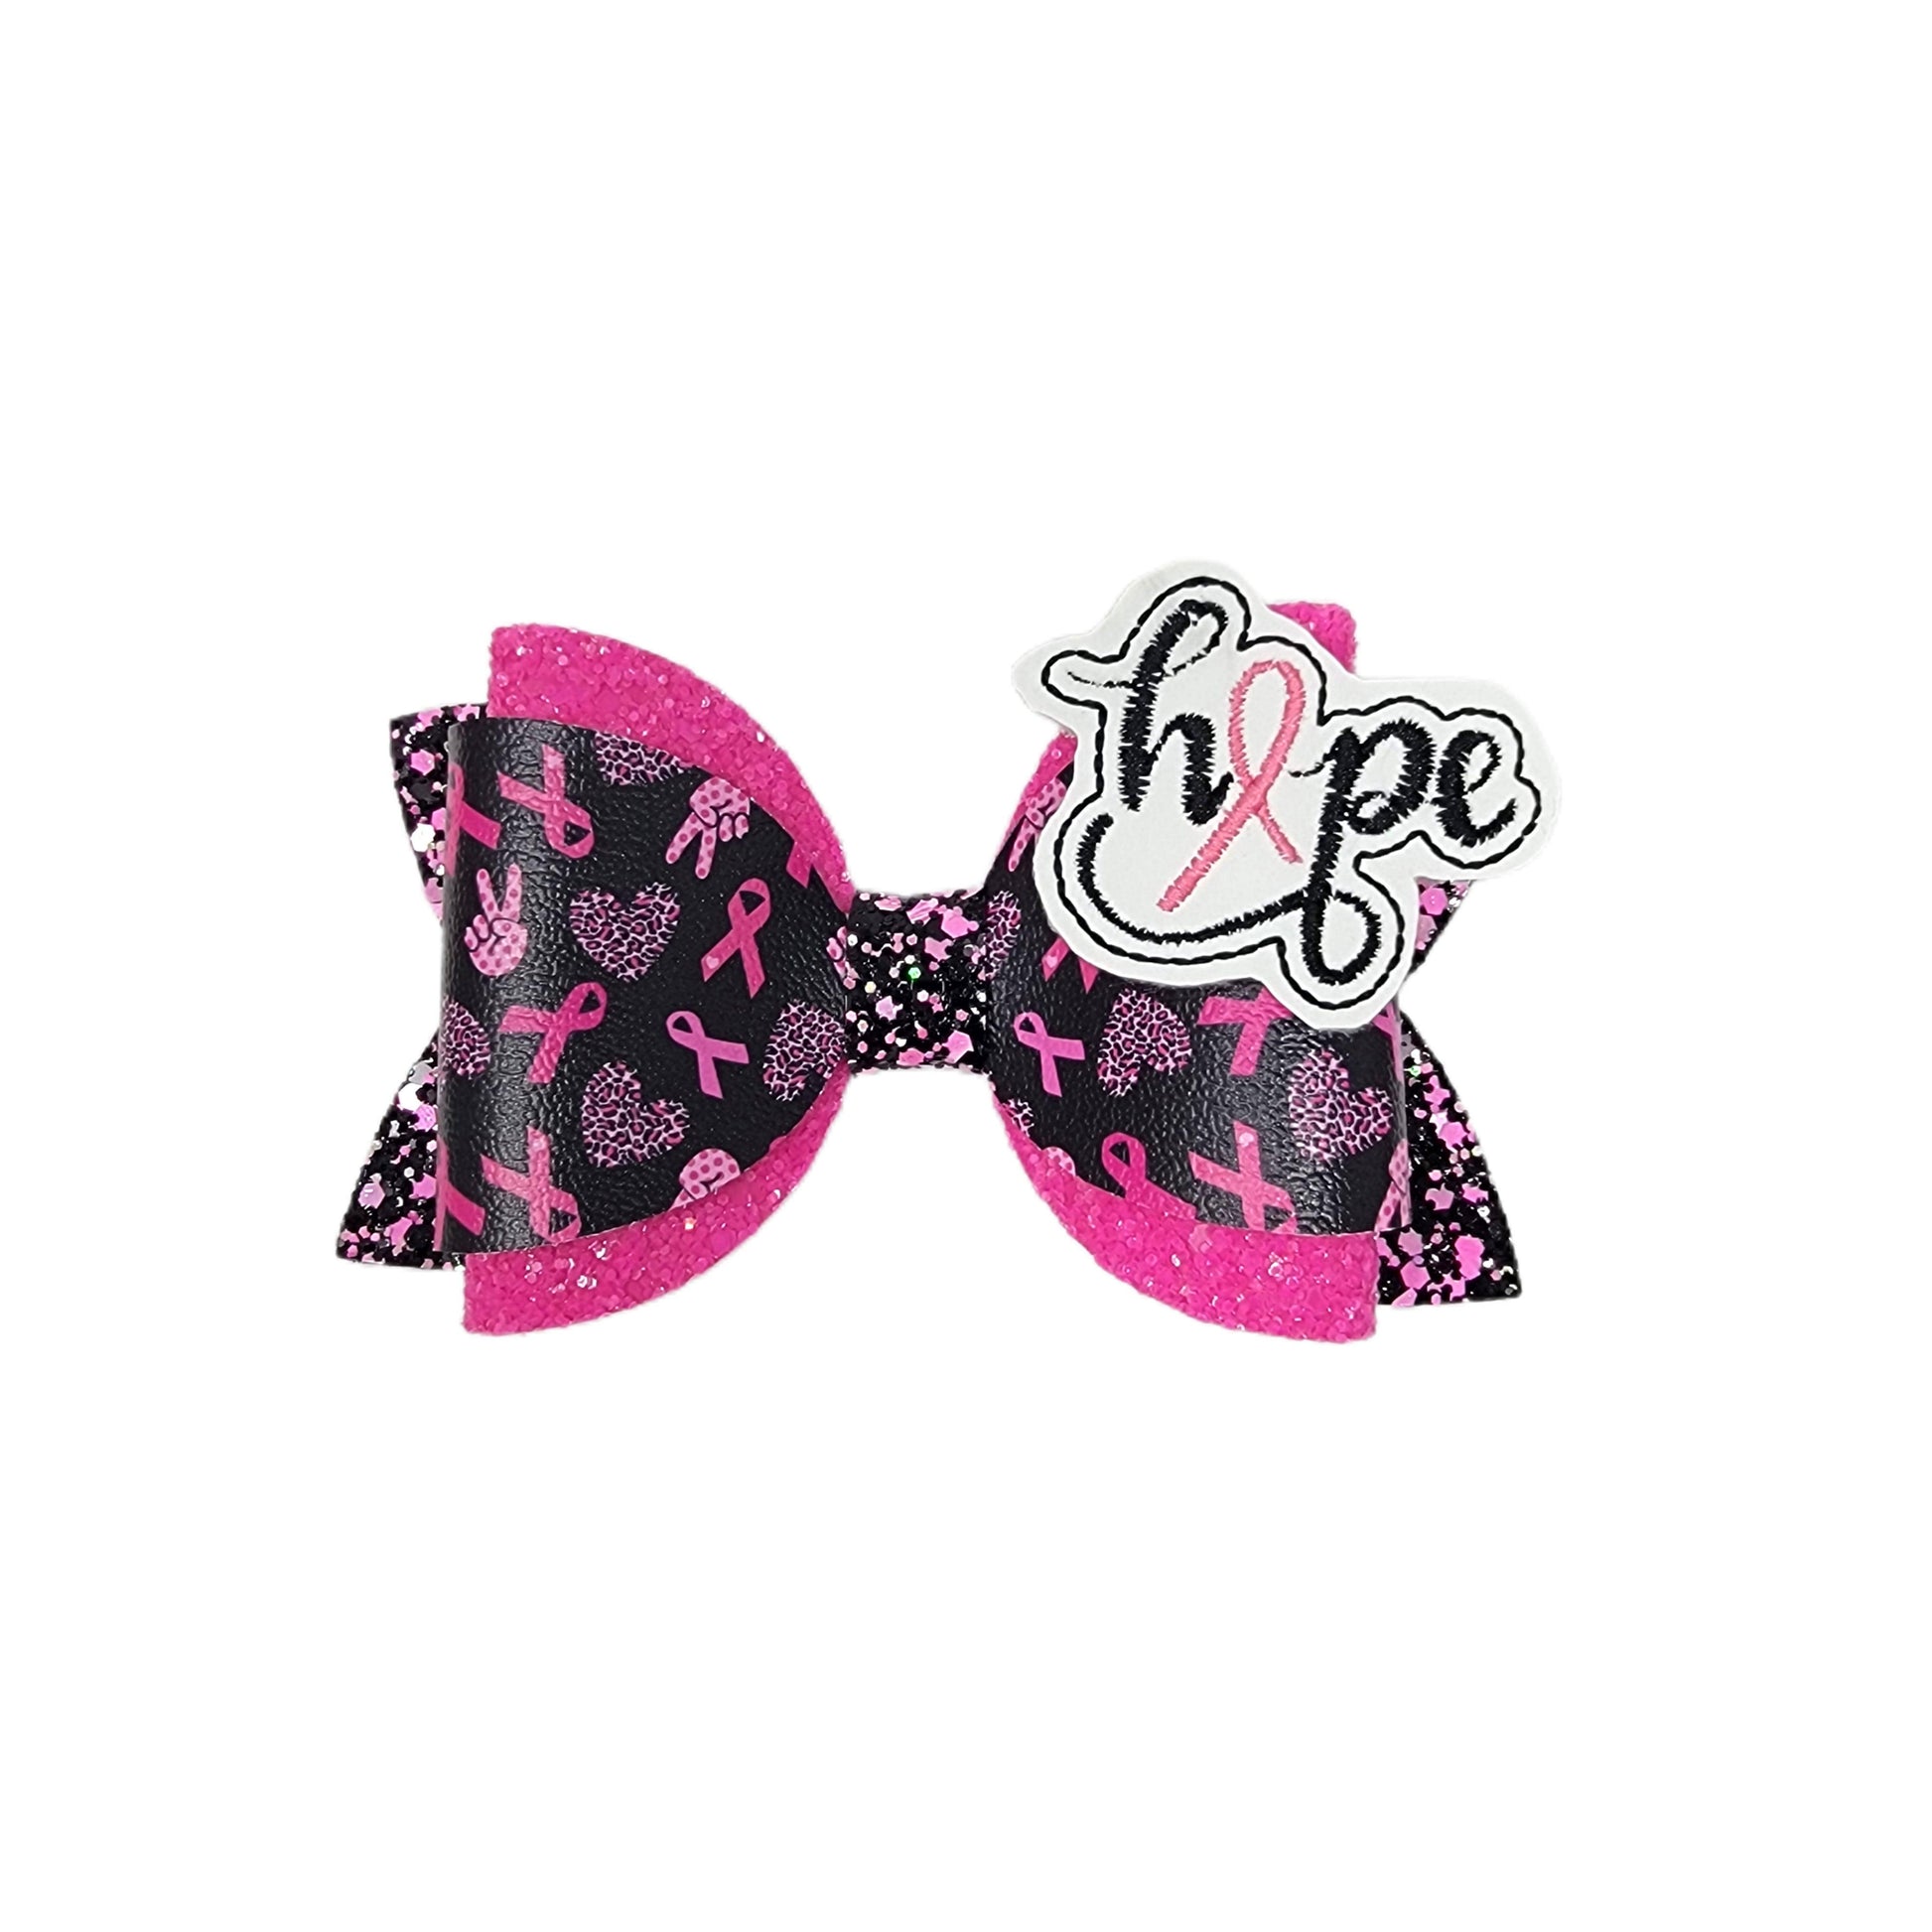 Peace Love Ribbons on Black Dressed-up Diva Bow with Hope Feltie 5"